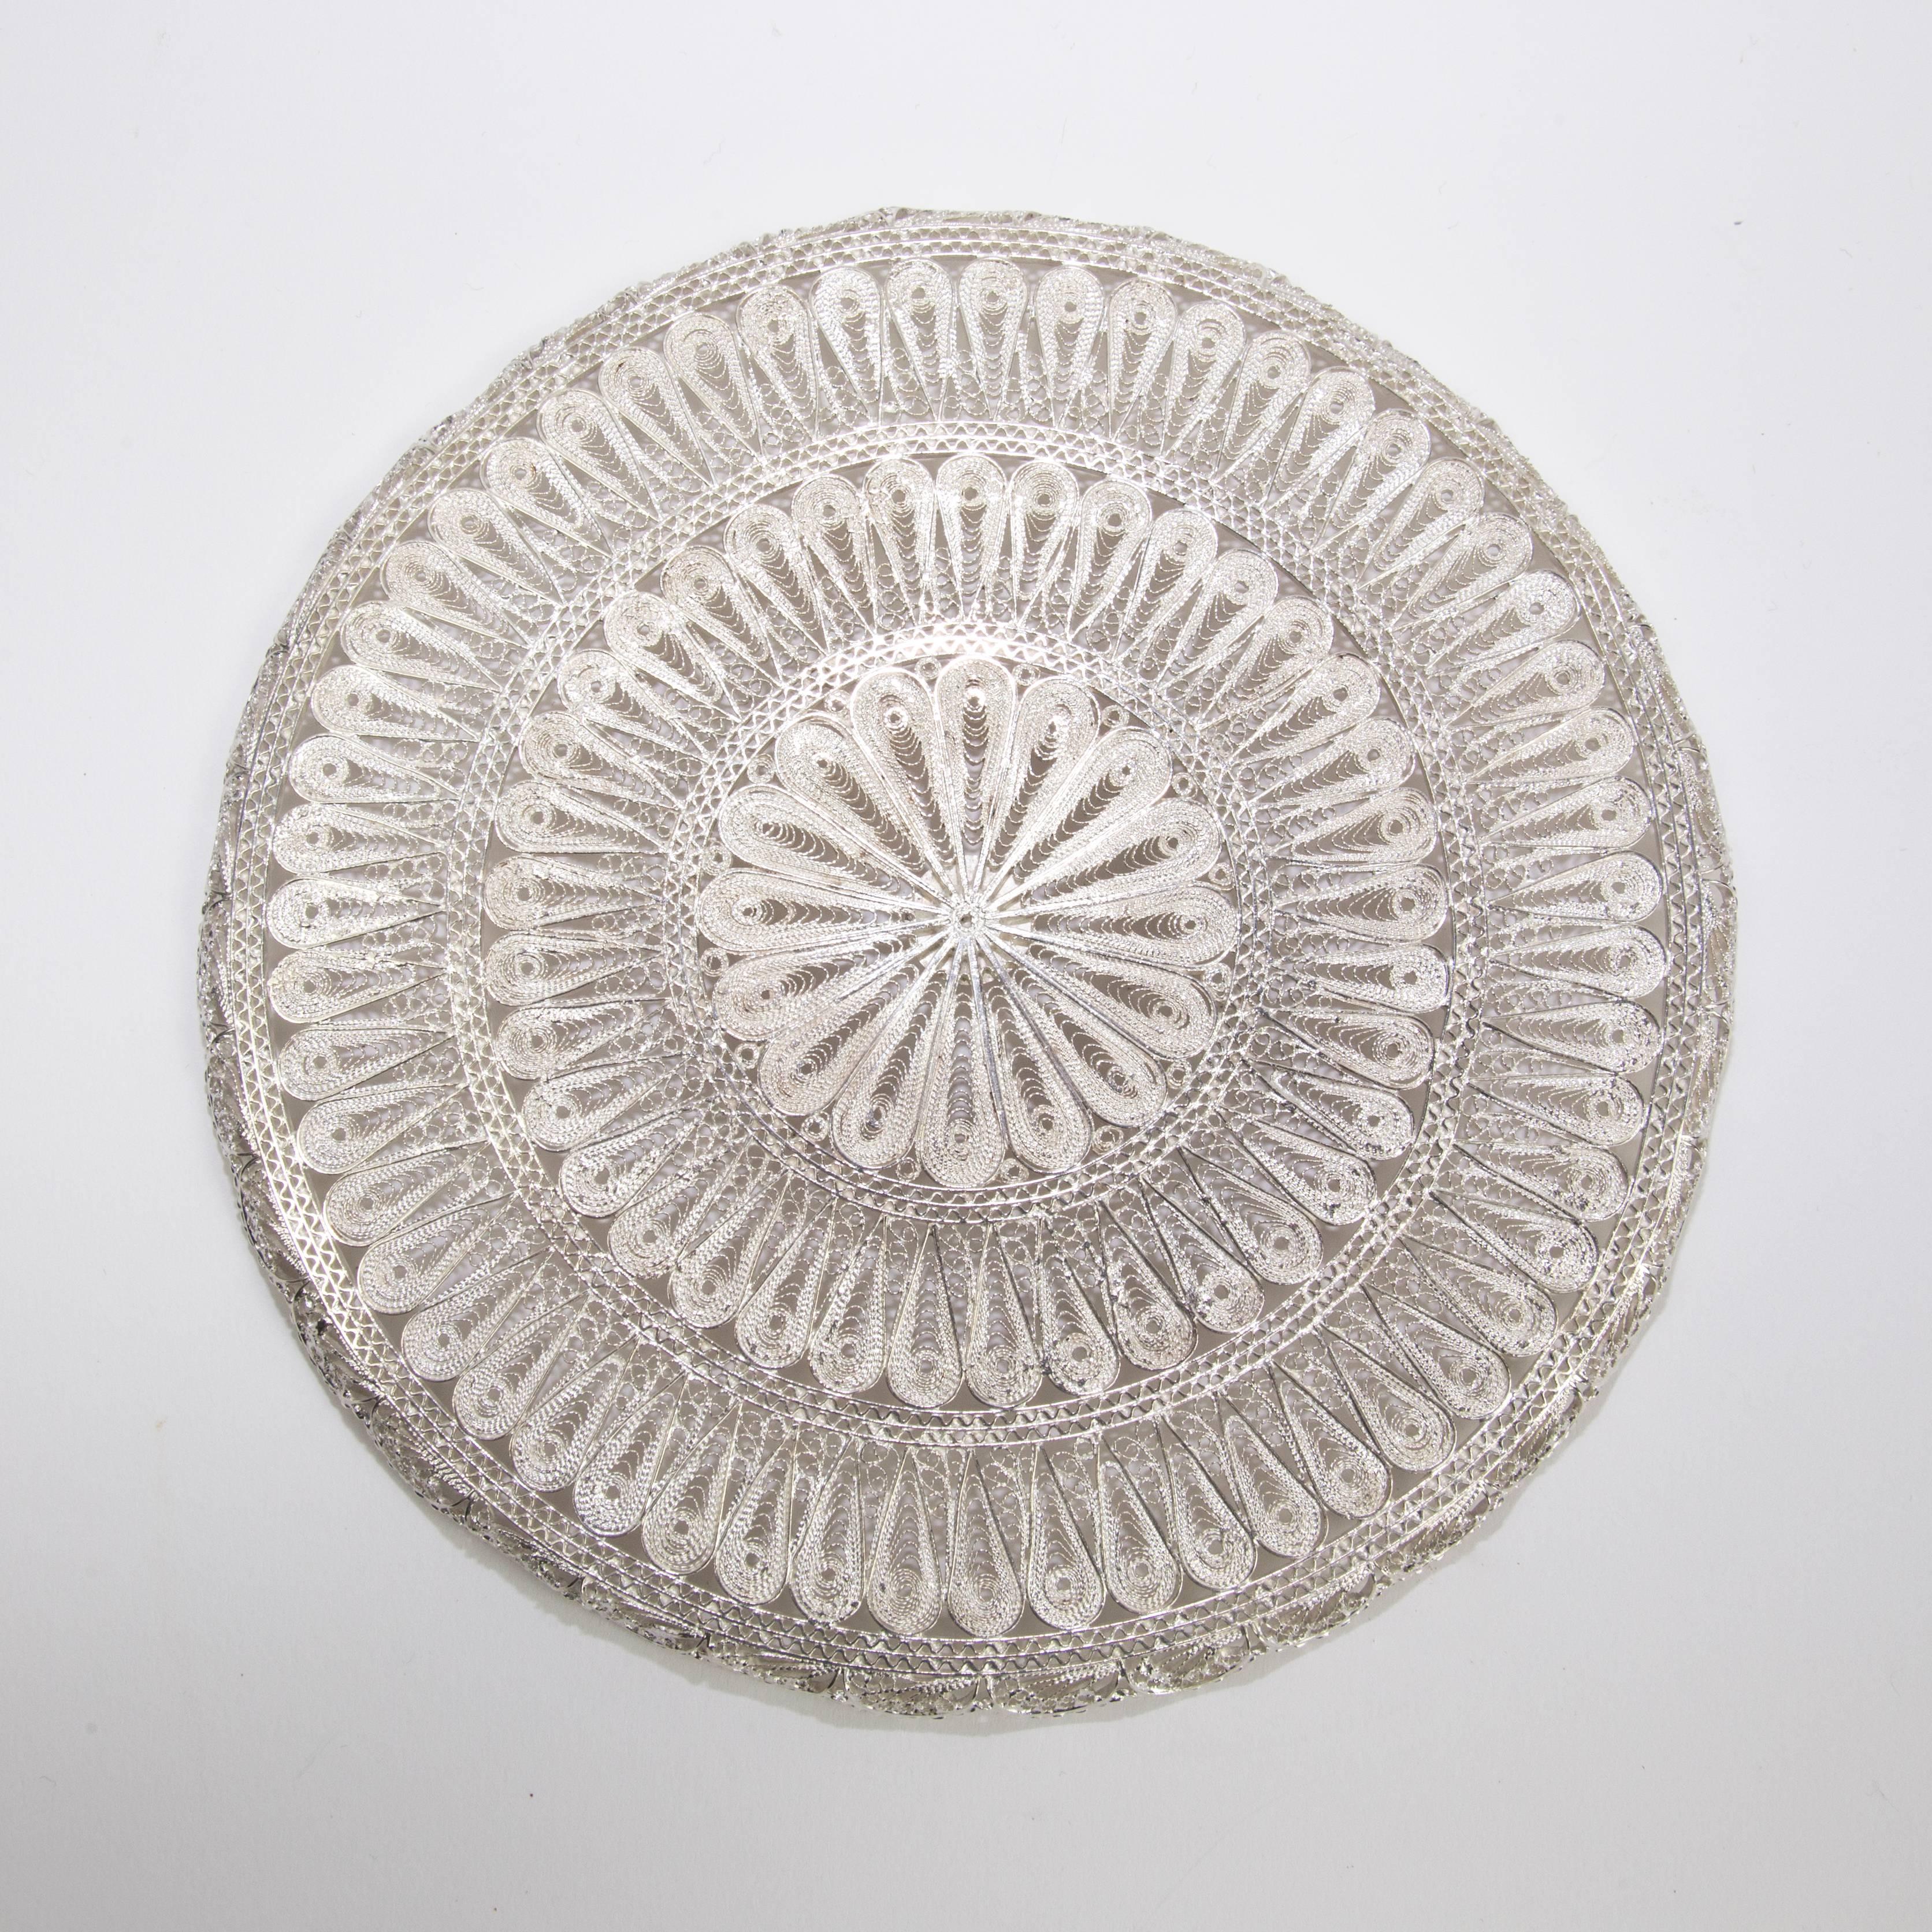 Solid Silver handcrafted circular tray with raised scalloped edge; measuring approximate 7 inches in diameter; weighing approximate 210.16 gm/6.76oz. Tested to a high grade silver.